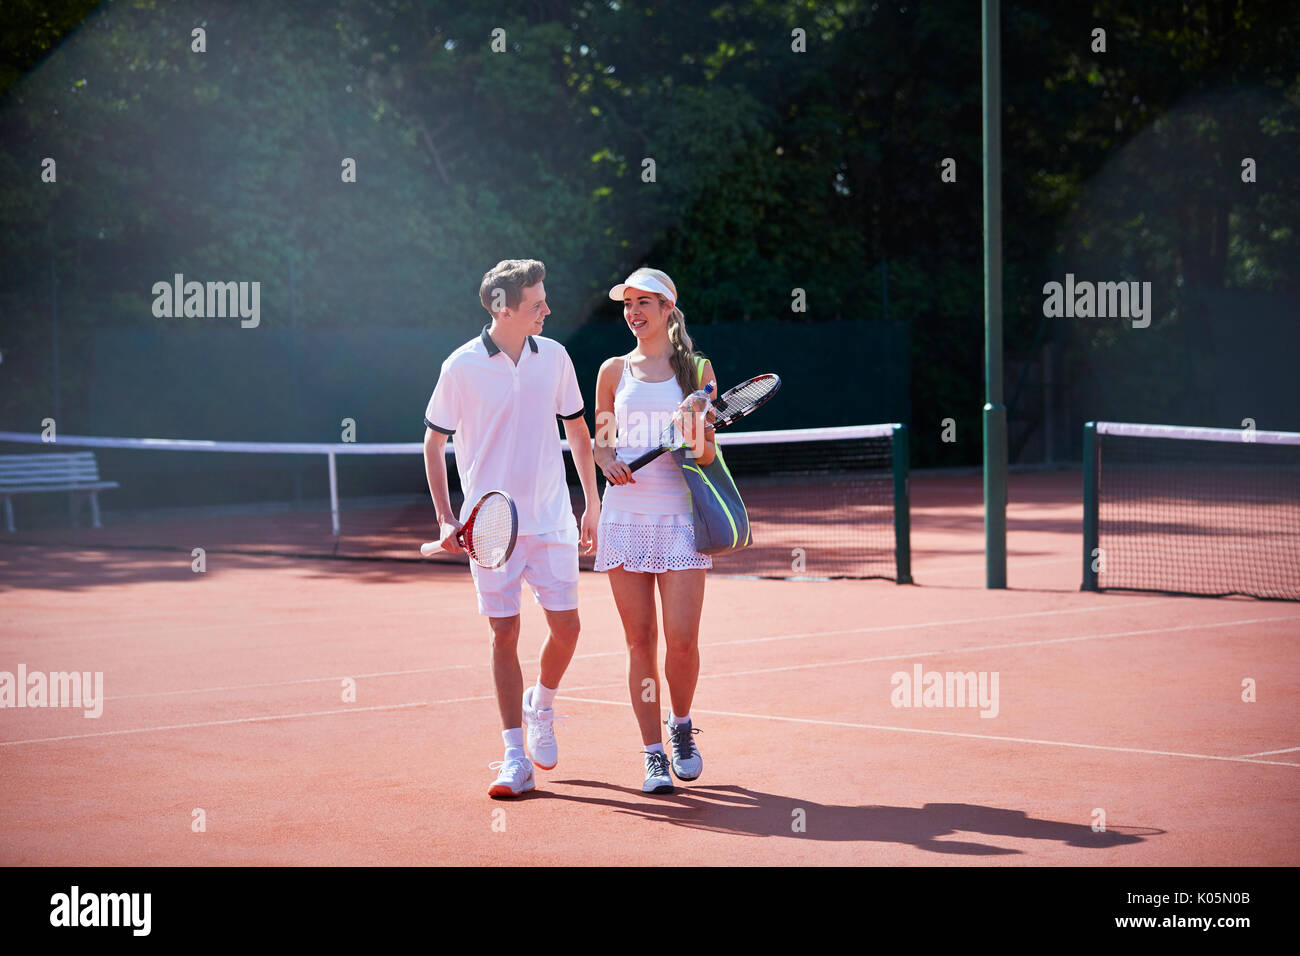 Tennis player couple walking, carrying tennis rackets on sunny clay tennis court Stock Photo